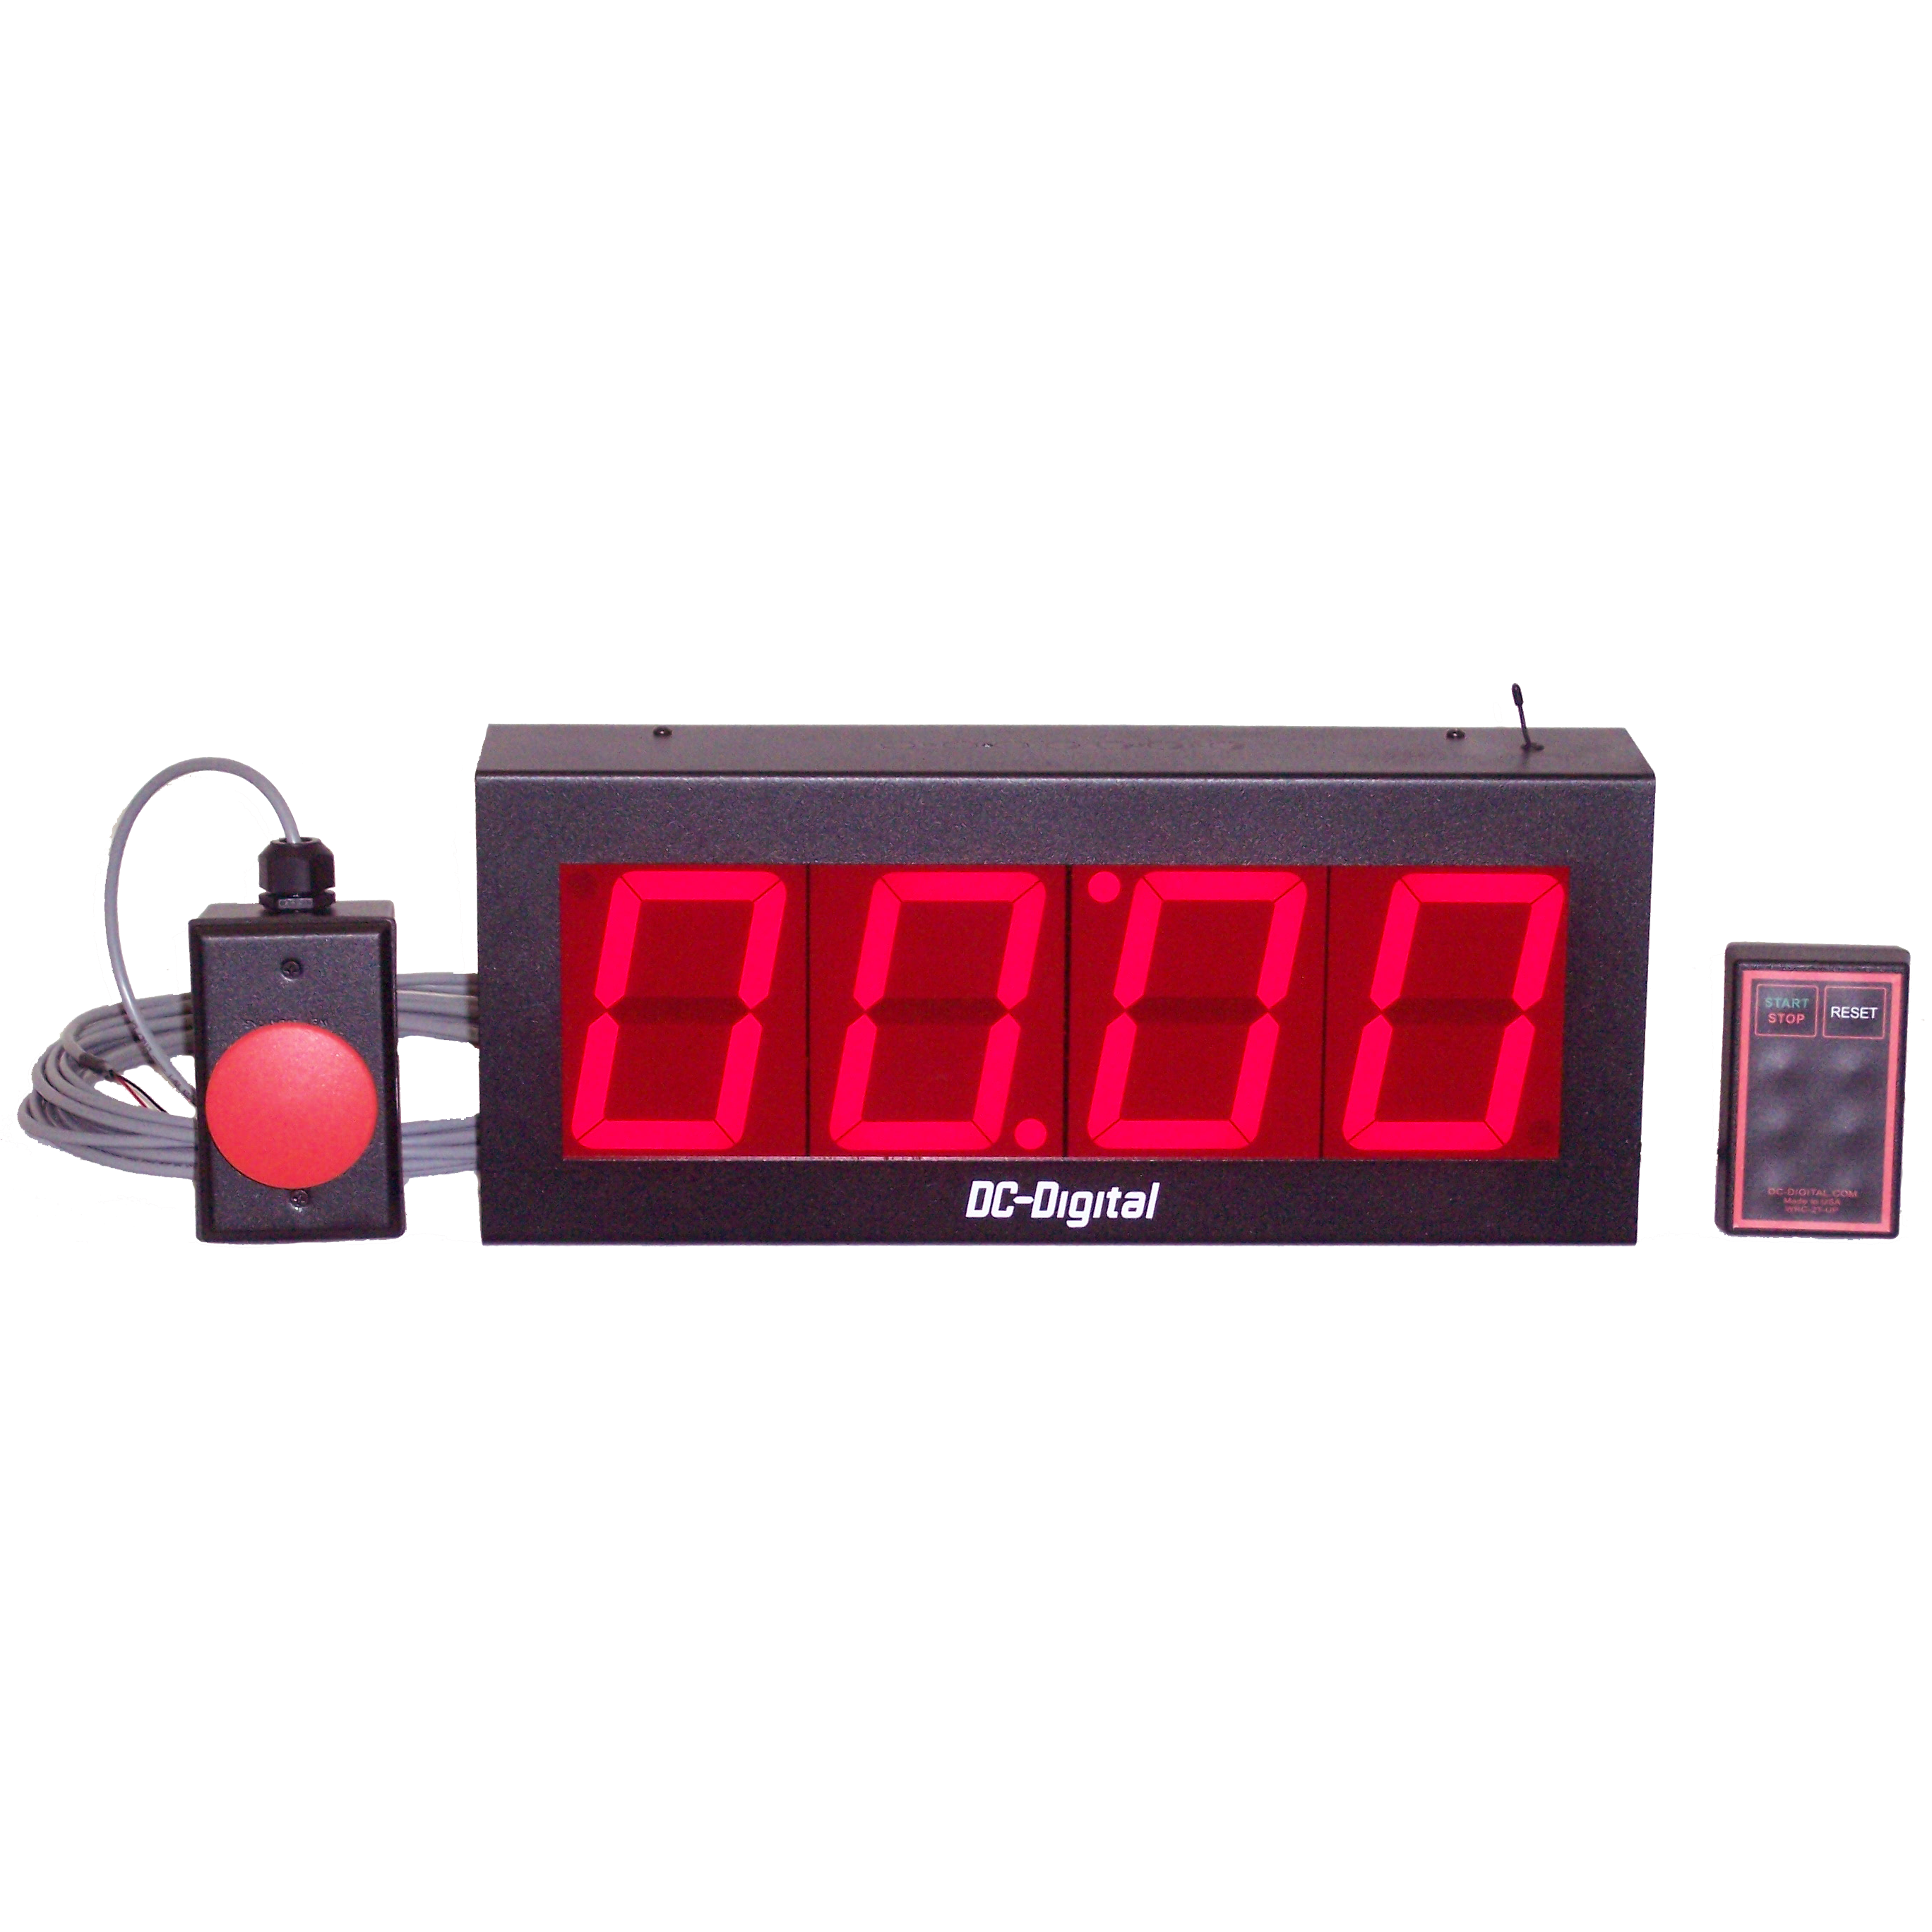 4 inch digital LED Count up timer with wireless controls and remote wired controls